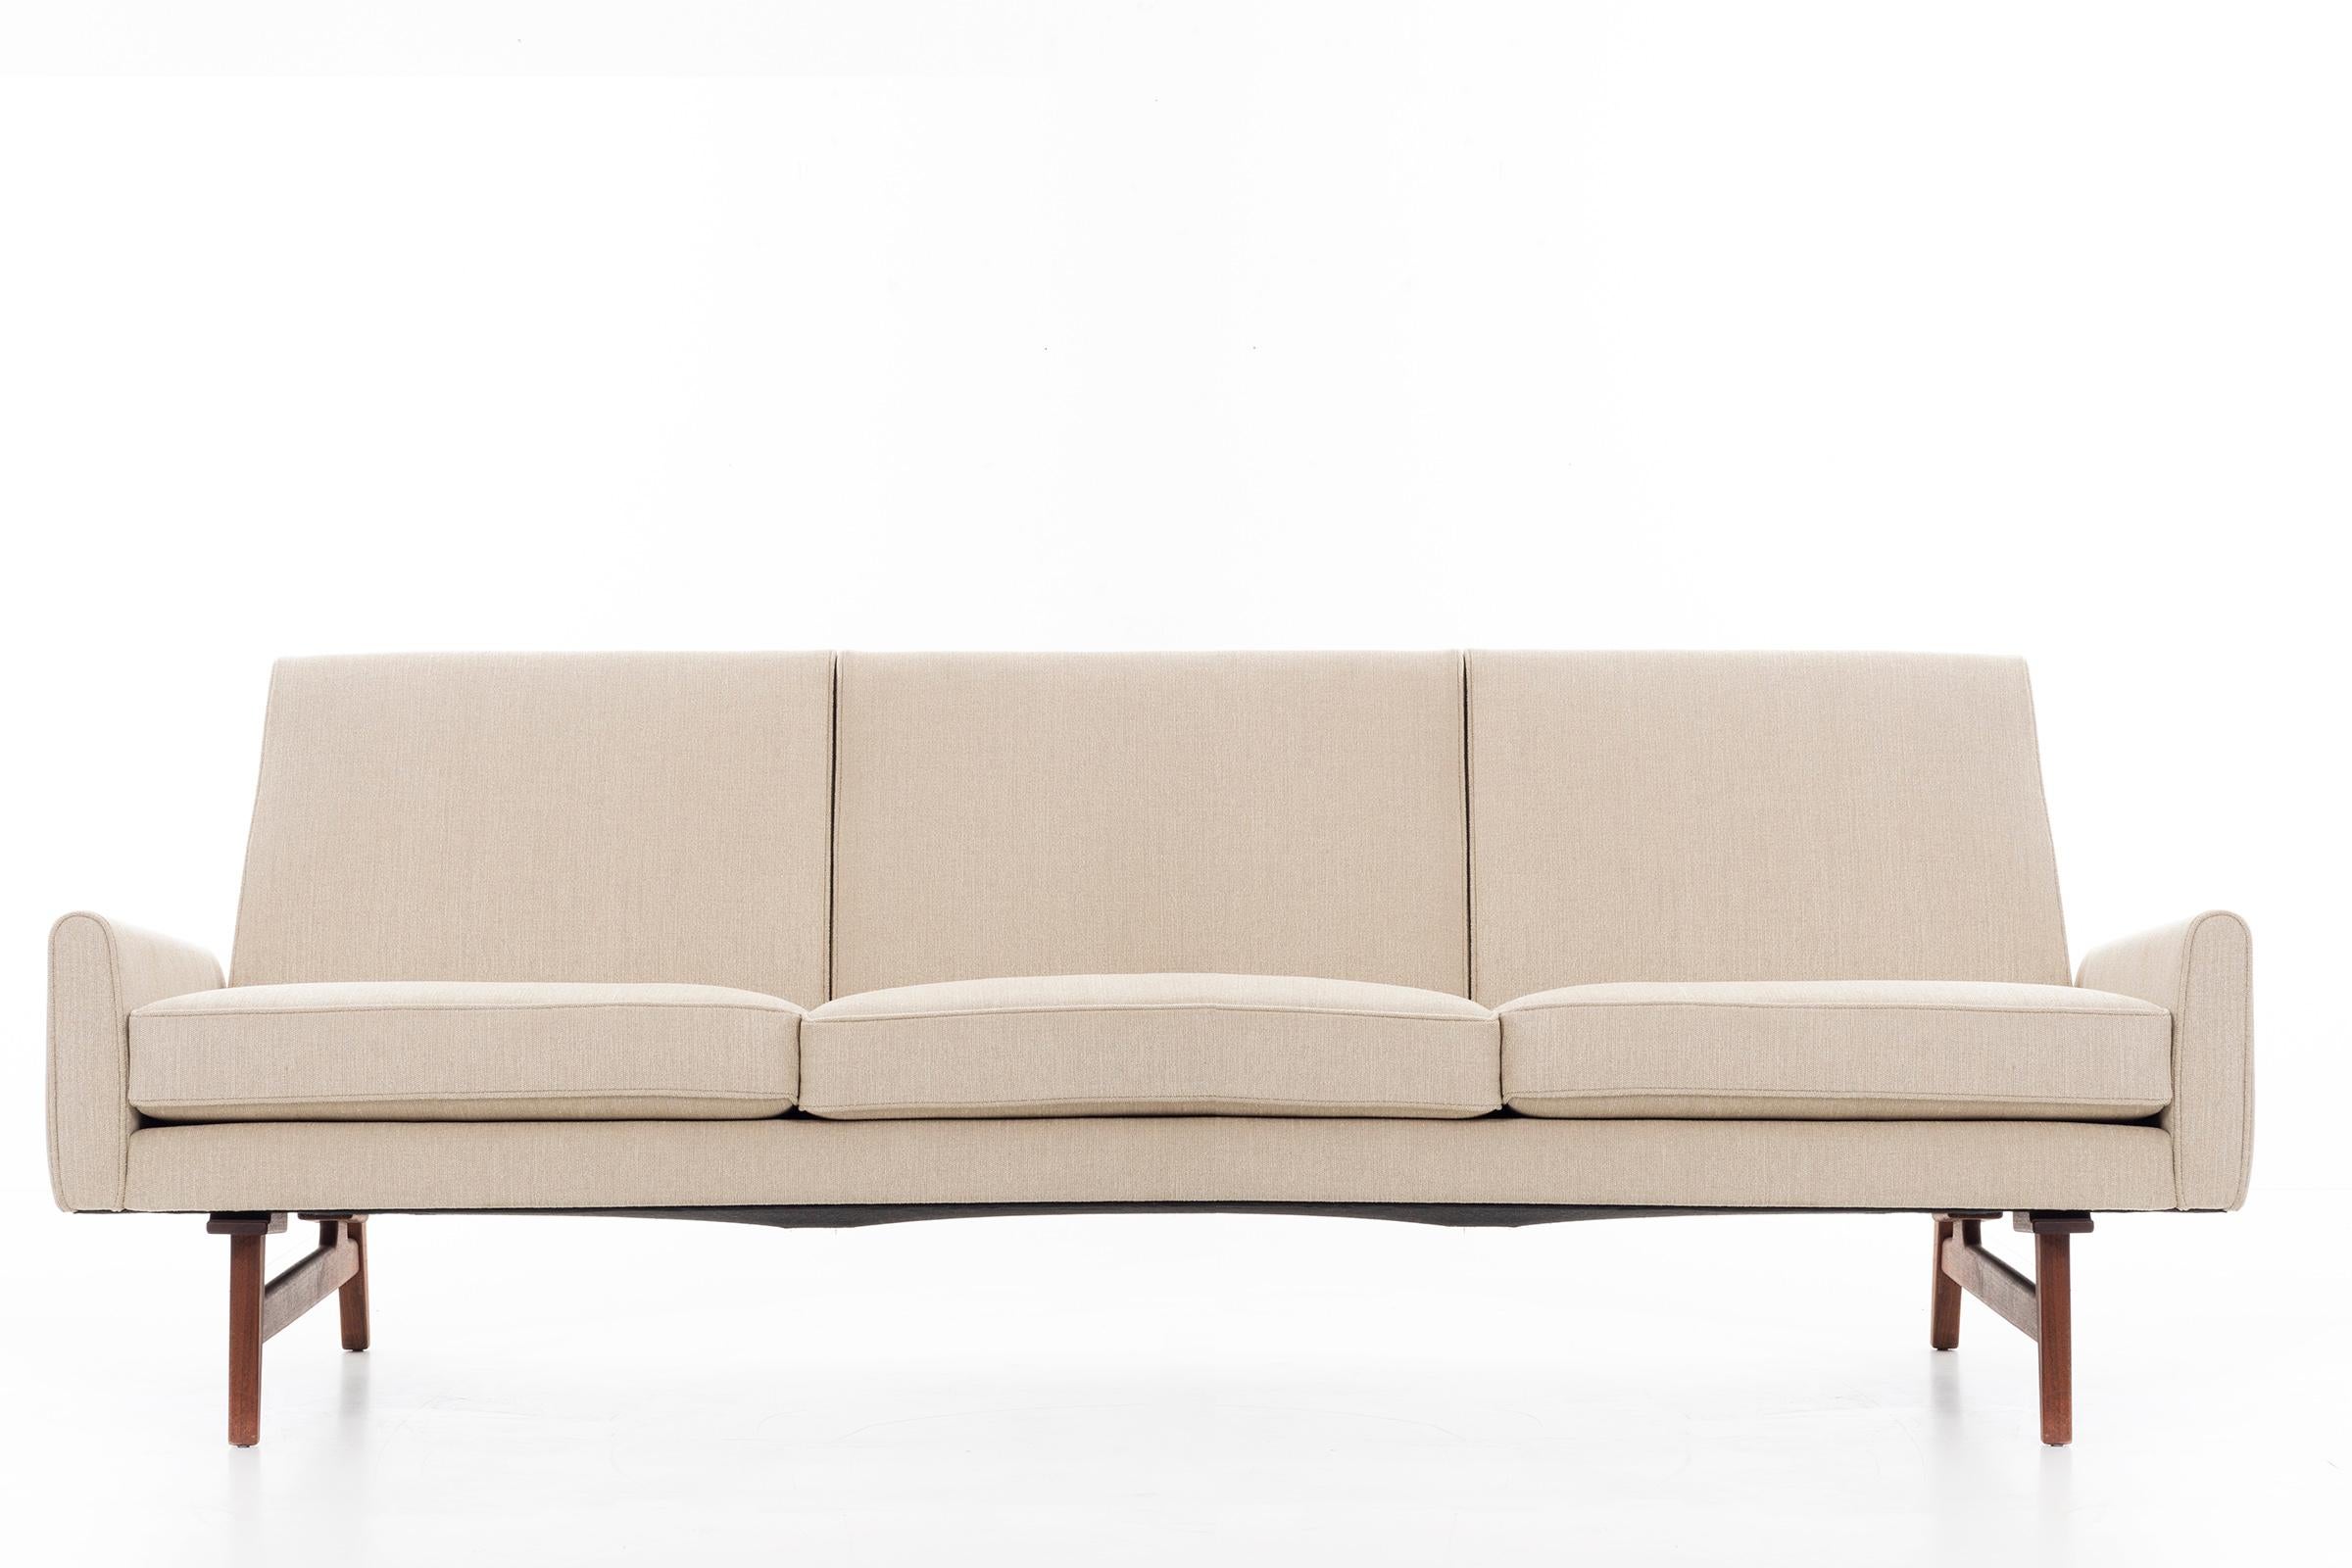 Risom for Risom Inc. three seat sofa; Solid oiled-walnut base holds sofa frame securely, rebuilt completely and reupholstered with great plains cotton-poly blend.
 